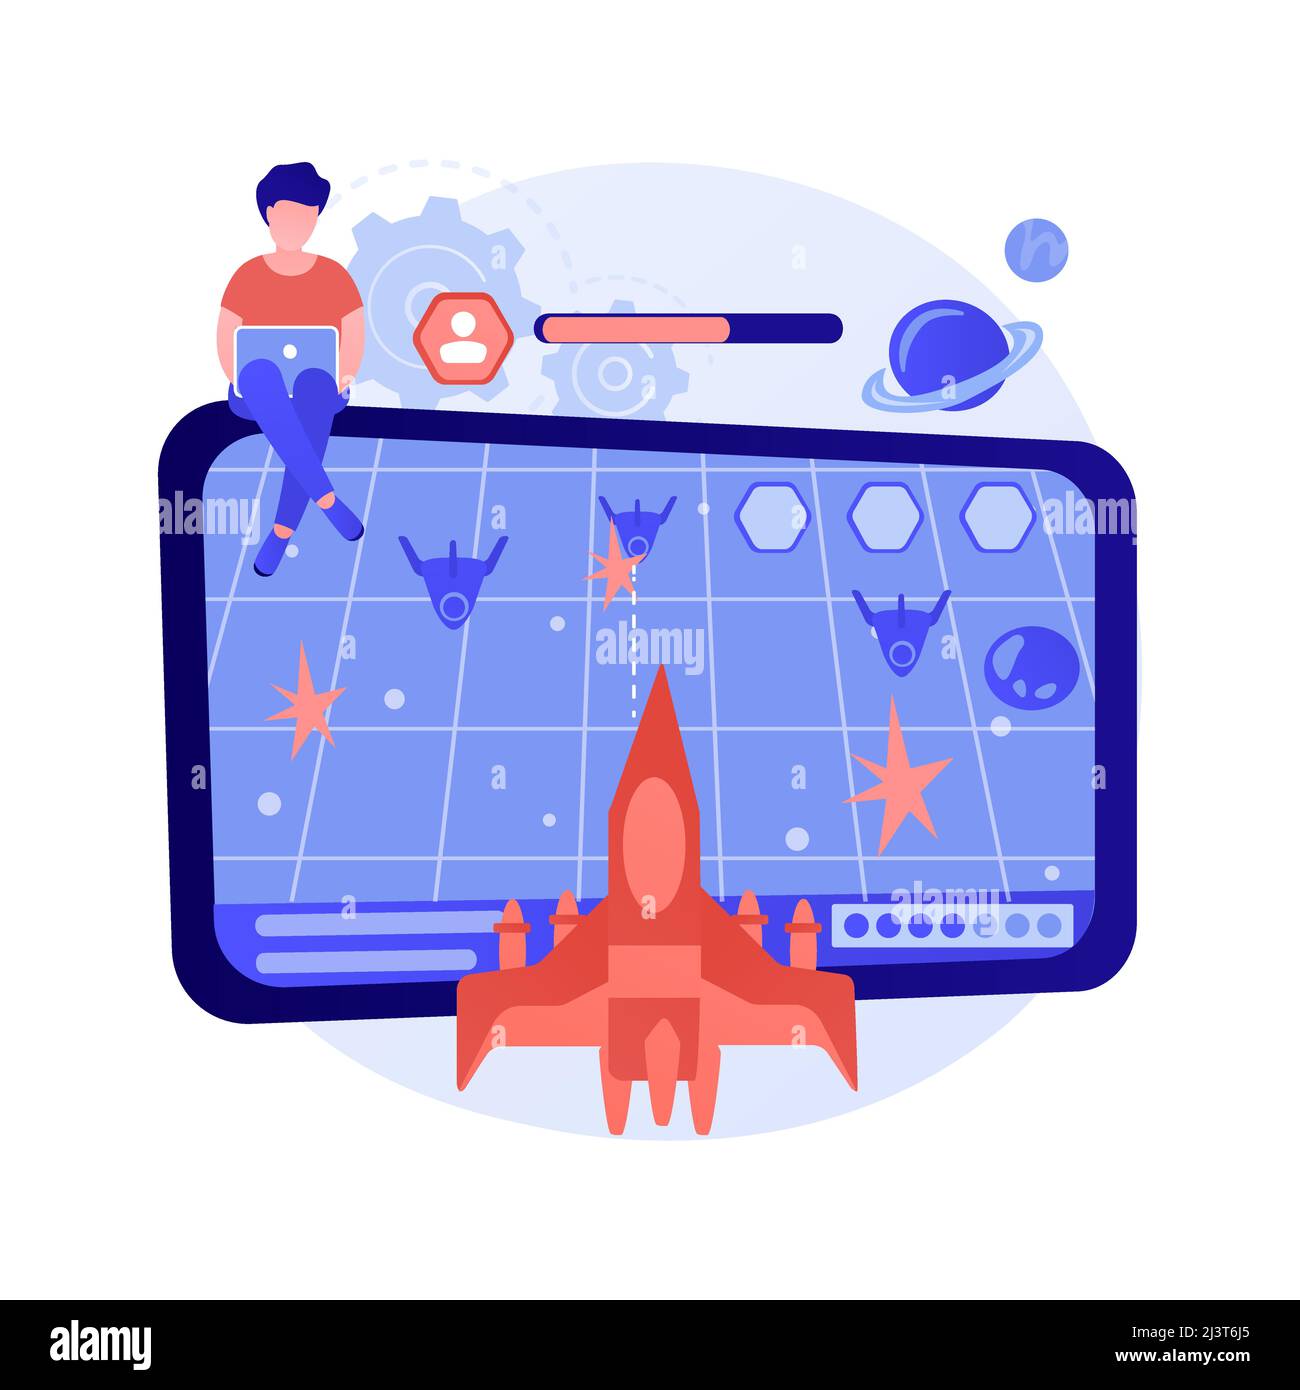 Action game abstract concept vector illustration. Fighting pc game, first-person shooter, action games championship, multiplayer online battle arena, Stock Vector